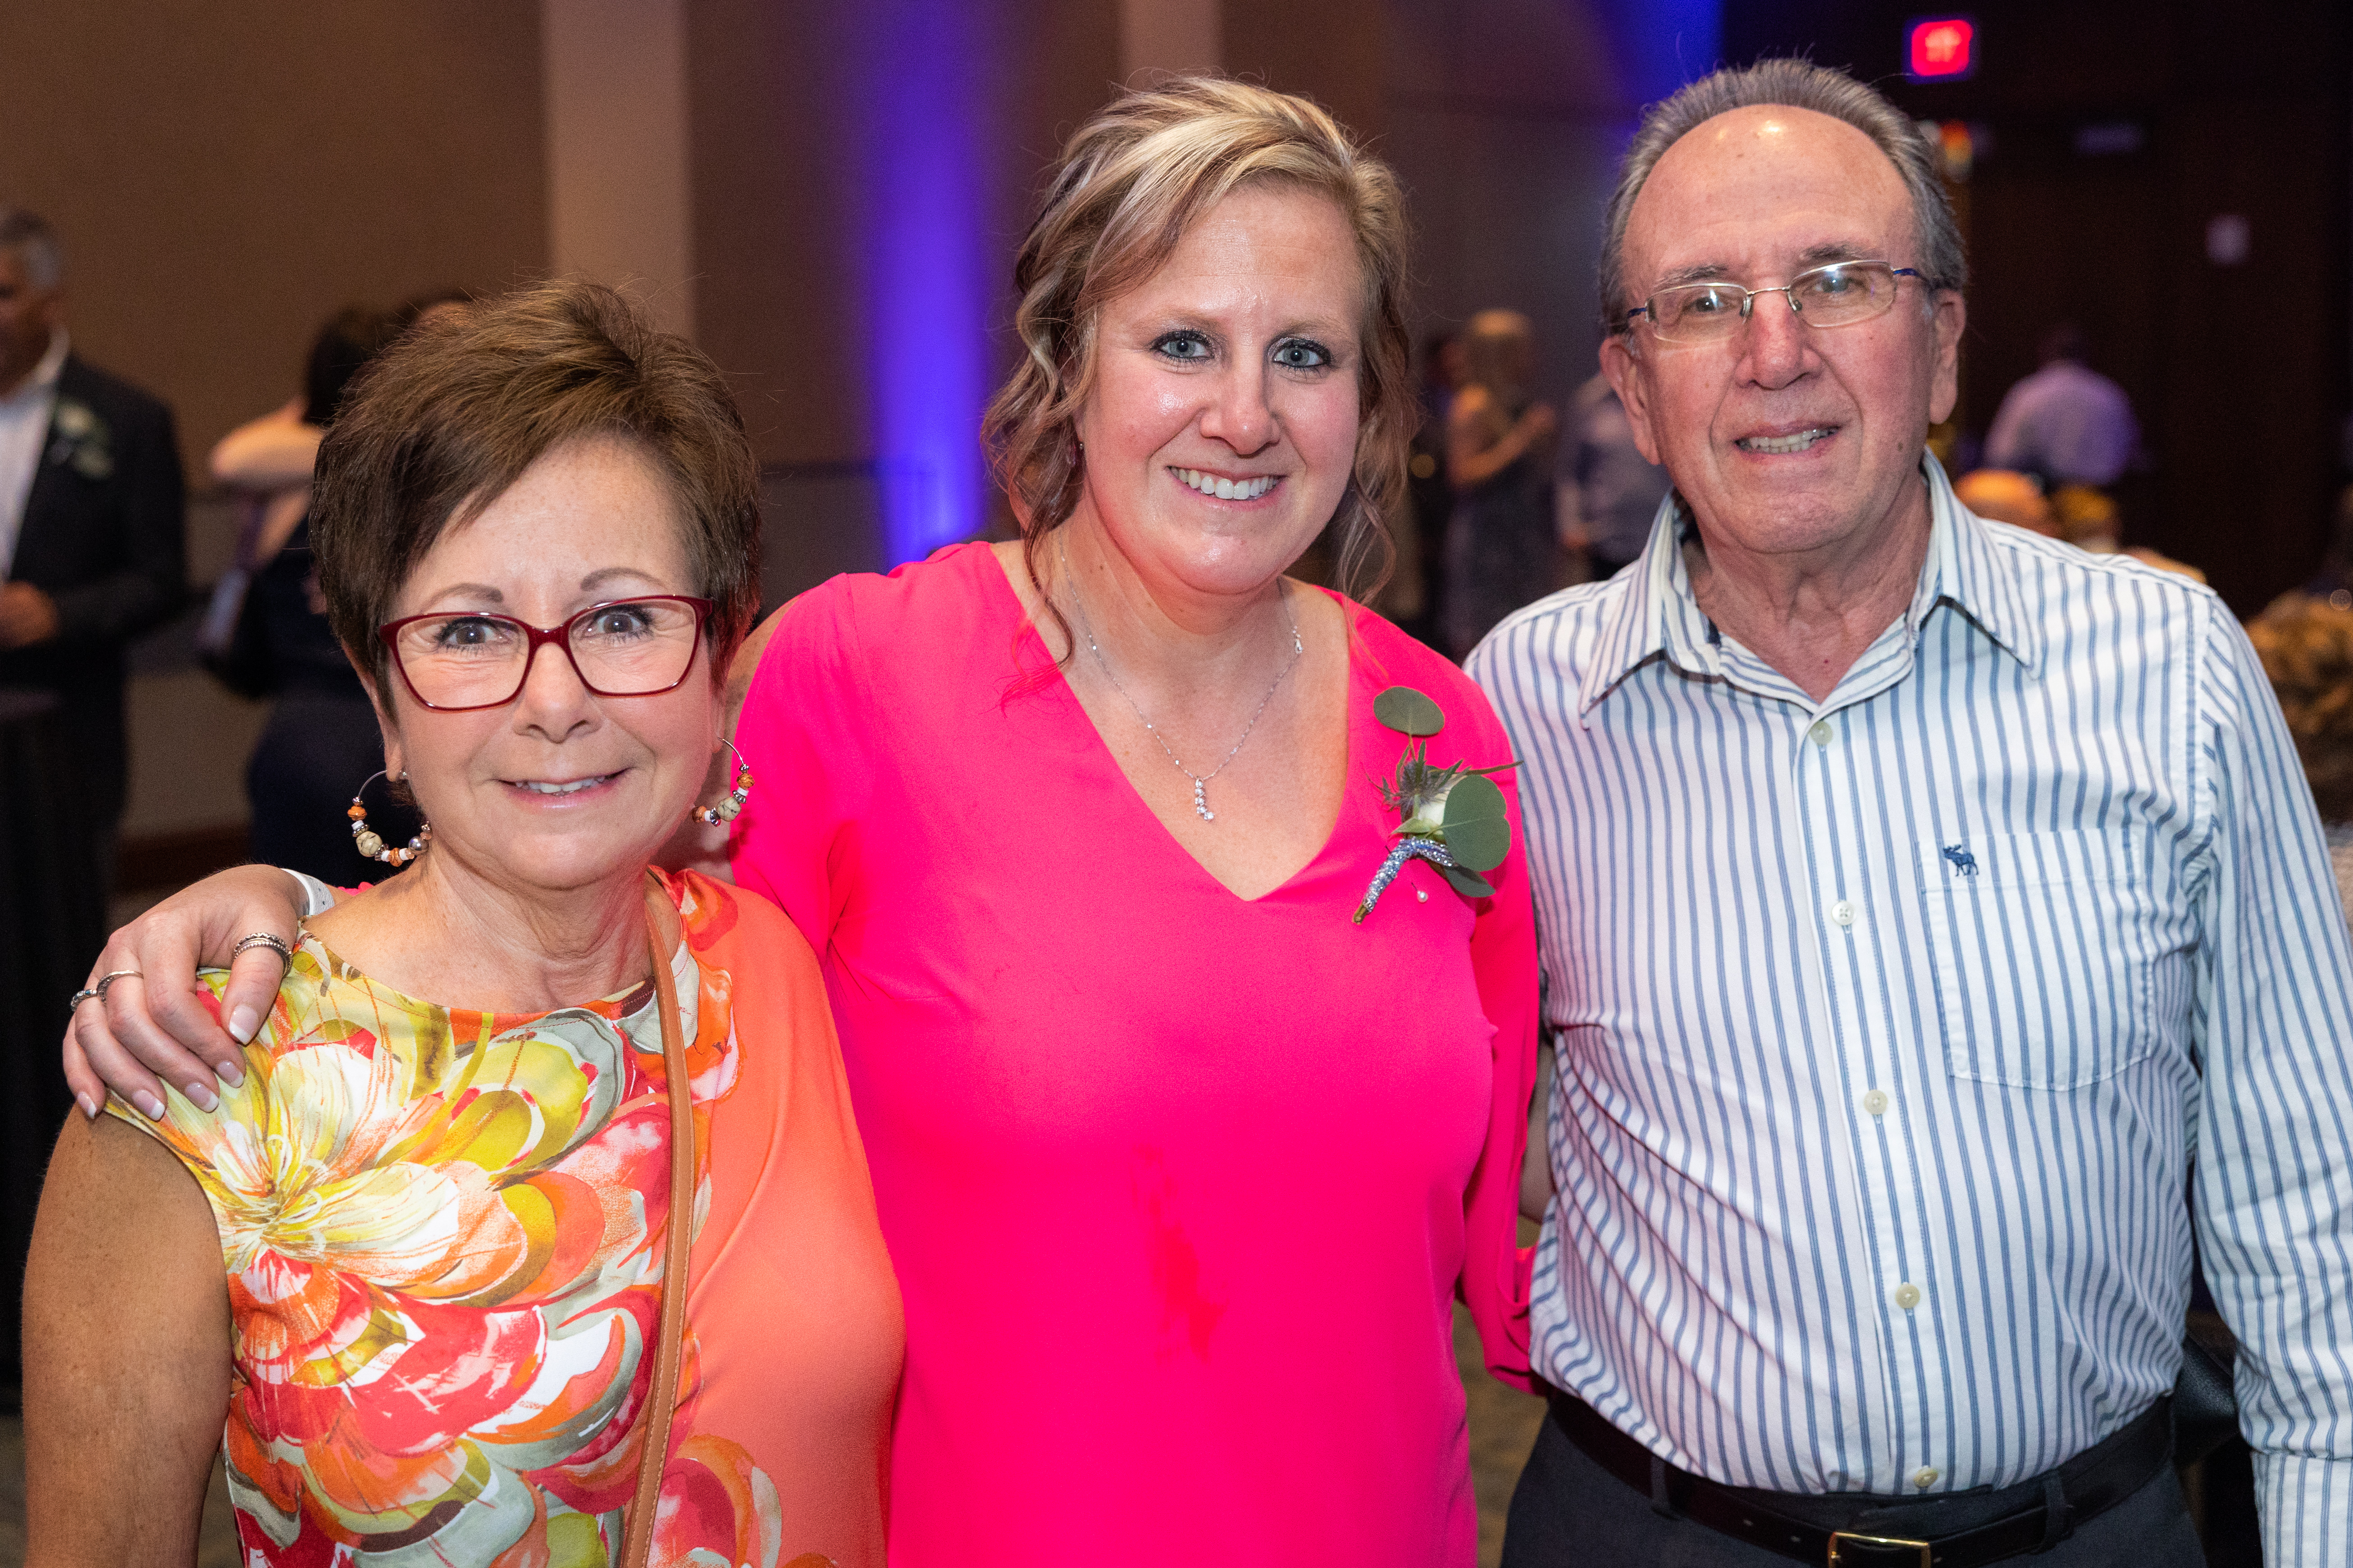 Finalist Sabrina Brizzolari, director of events for MassMutual Center and a Howdy Award winner, with her parents Barbara and Mario Brizzolari at the 25th annual Howdy Awards for Hospitality Excellence held at the MassMutual Center Monday evening, May 16, 2022. (Hoang ‘Leon’ Nguyen / The Republican)